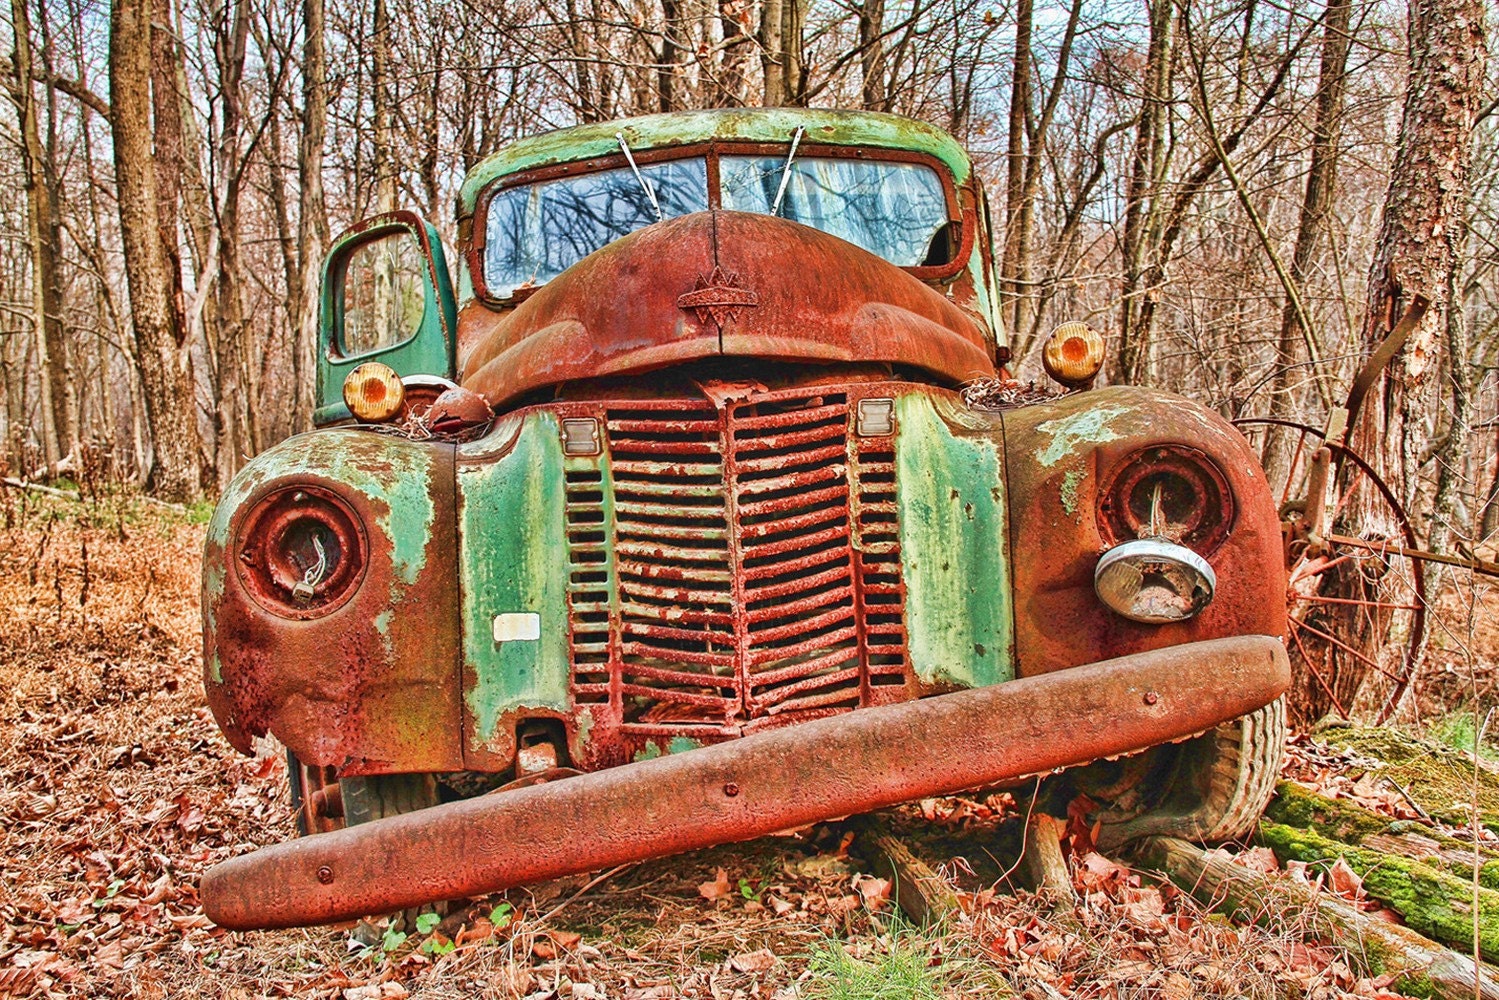 Rustic Photography, Rusty, Autumn, Vintage, Rusty Old Green Truck, Car, HDR Photograph, Art Print, 6X9, Other Sizes Available